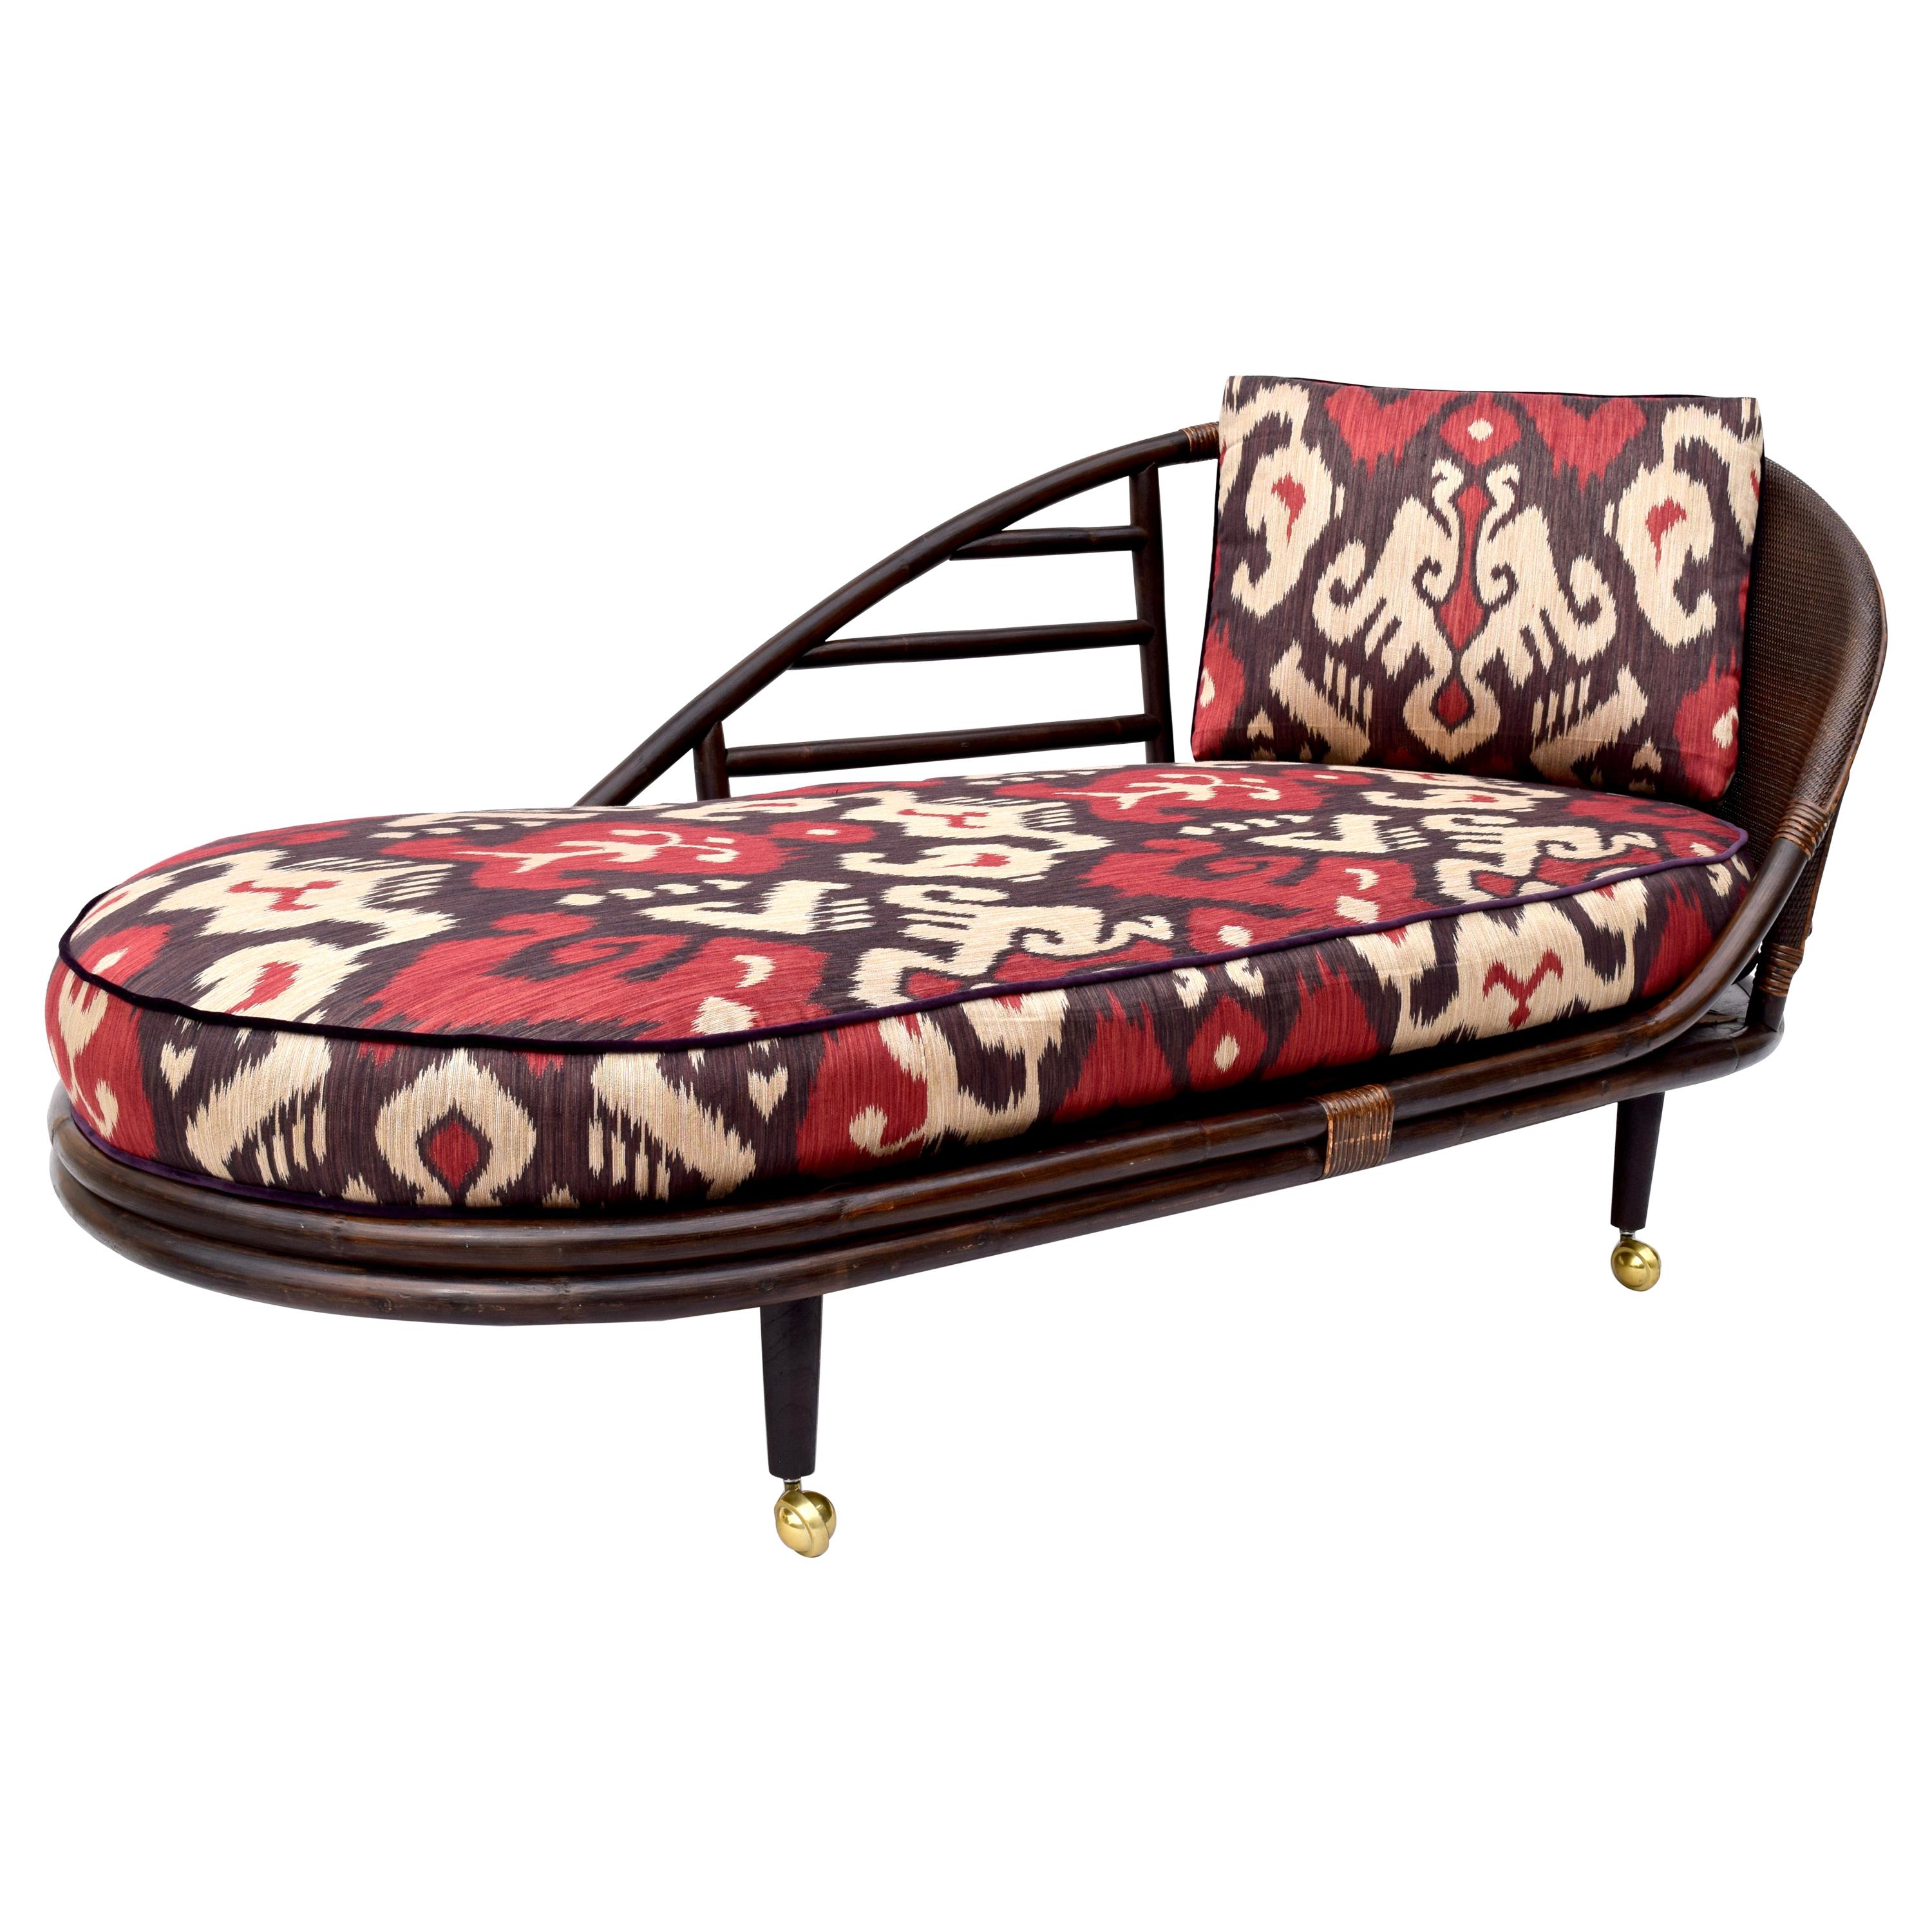 Chinoiserie Rattan Grasscloth Chaise Lounge in Ikat